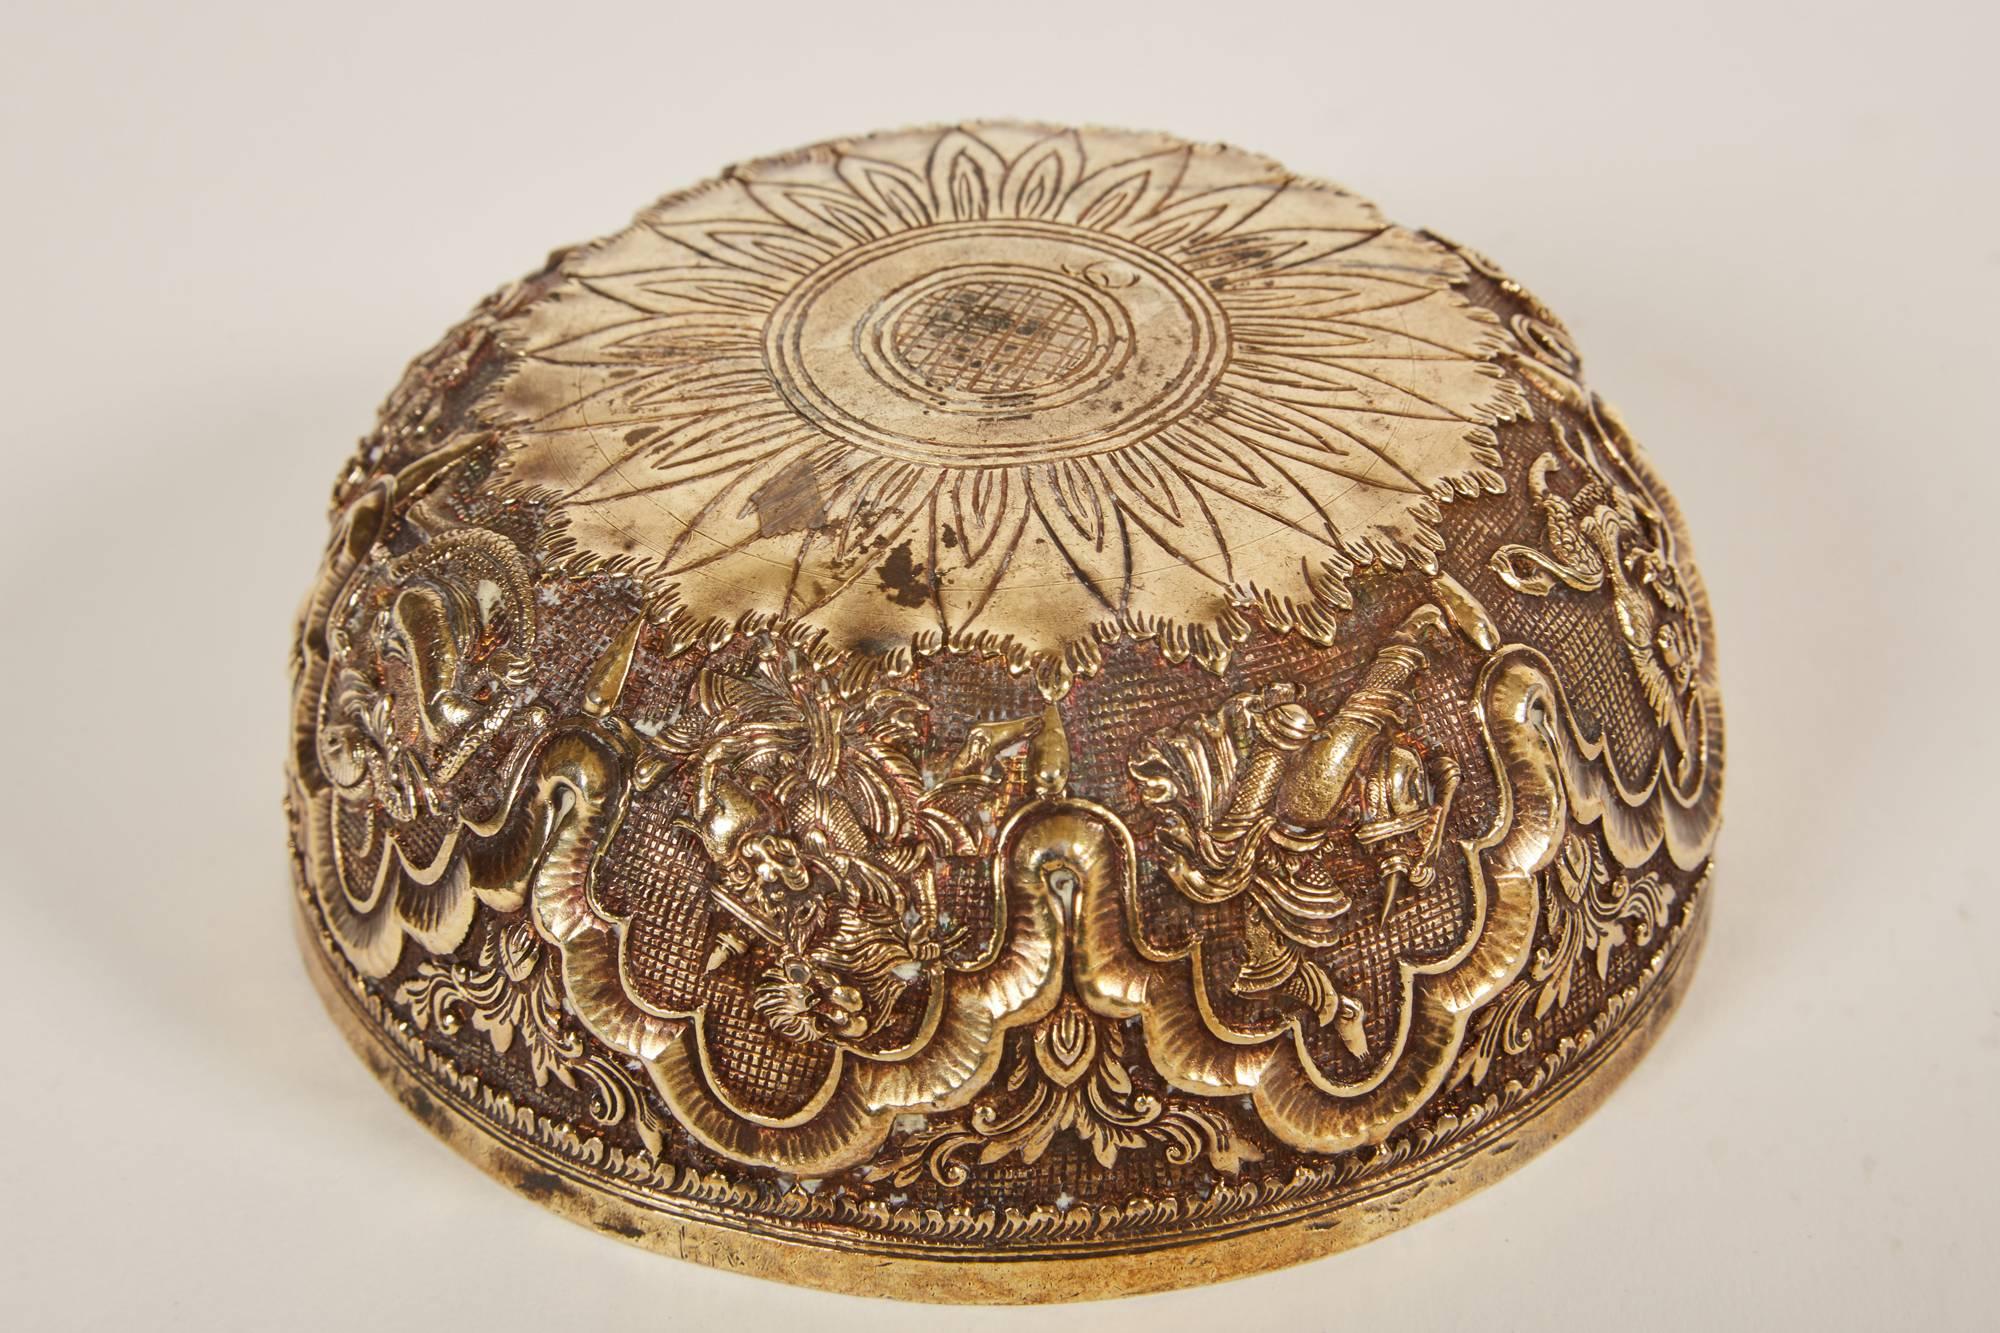 A stunning small 20th century Indian silver bowl in the Anglo-Raj style. The bowl is comprised of mythical creatures, foliage and Classic Indian motif relief.